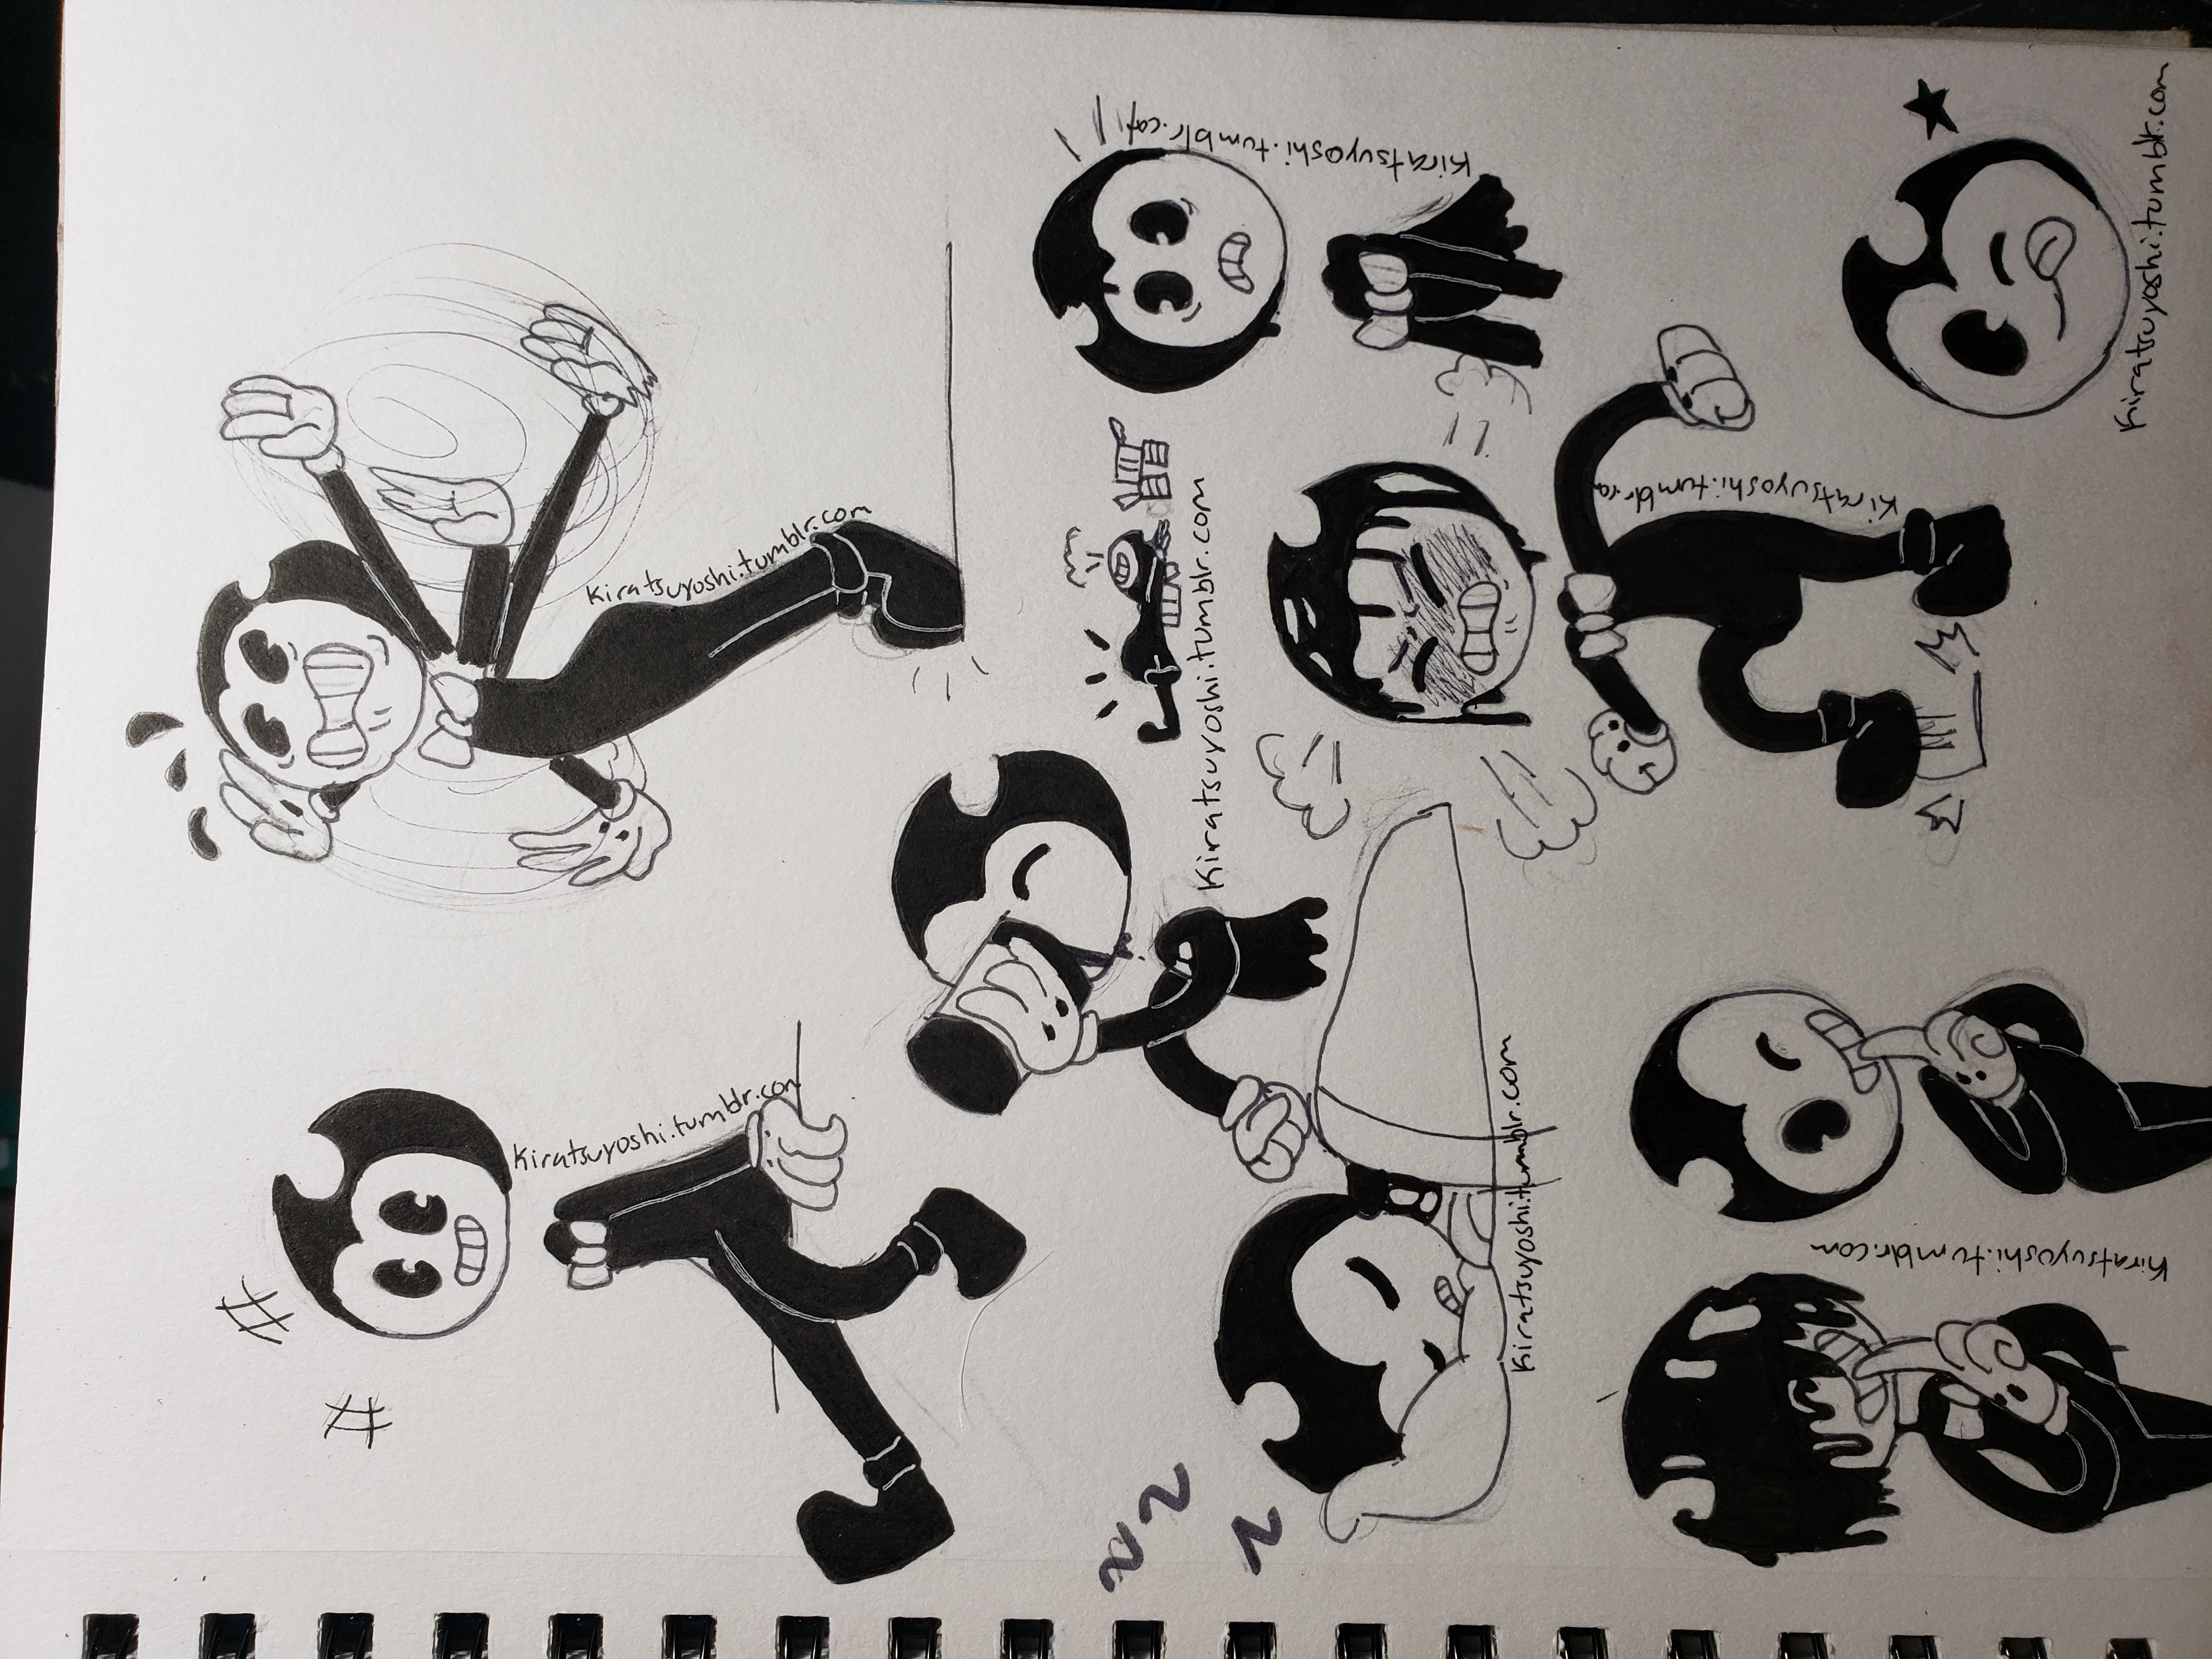 bendy and the ink machine, Tumblr